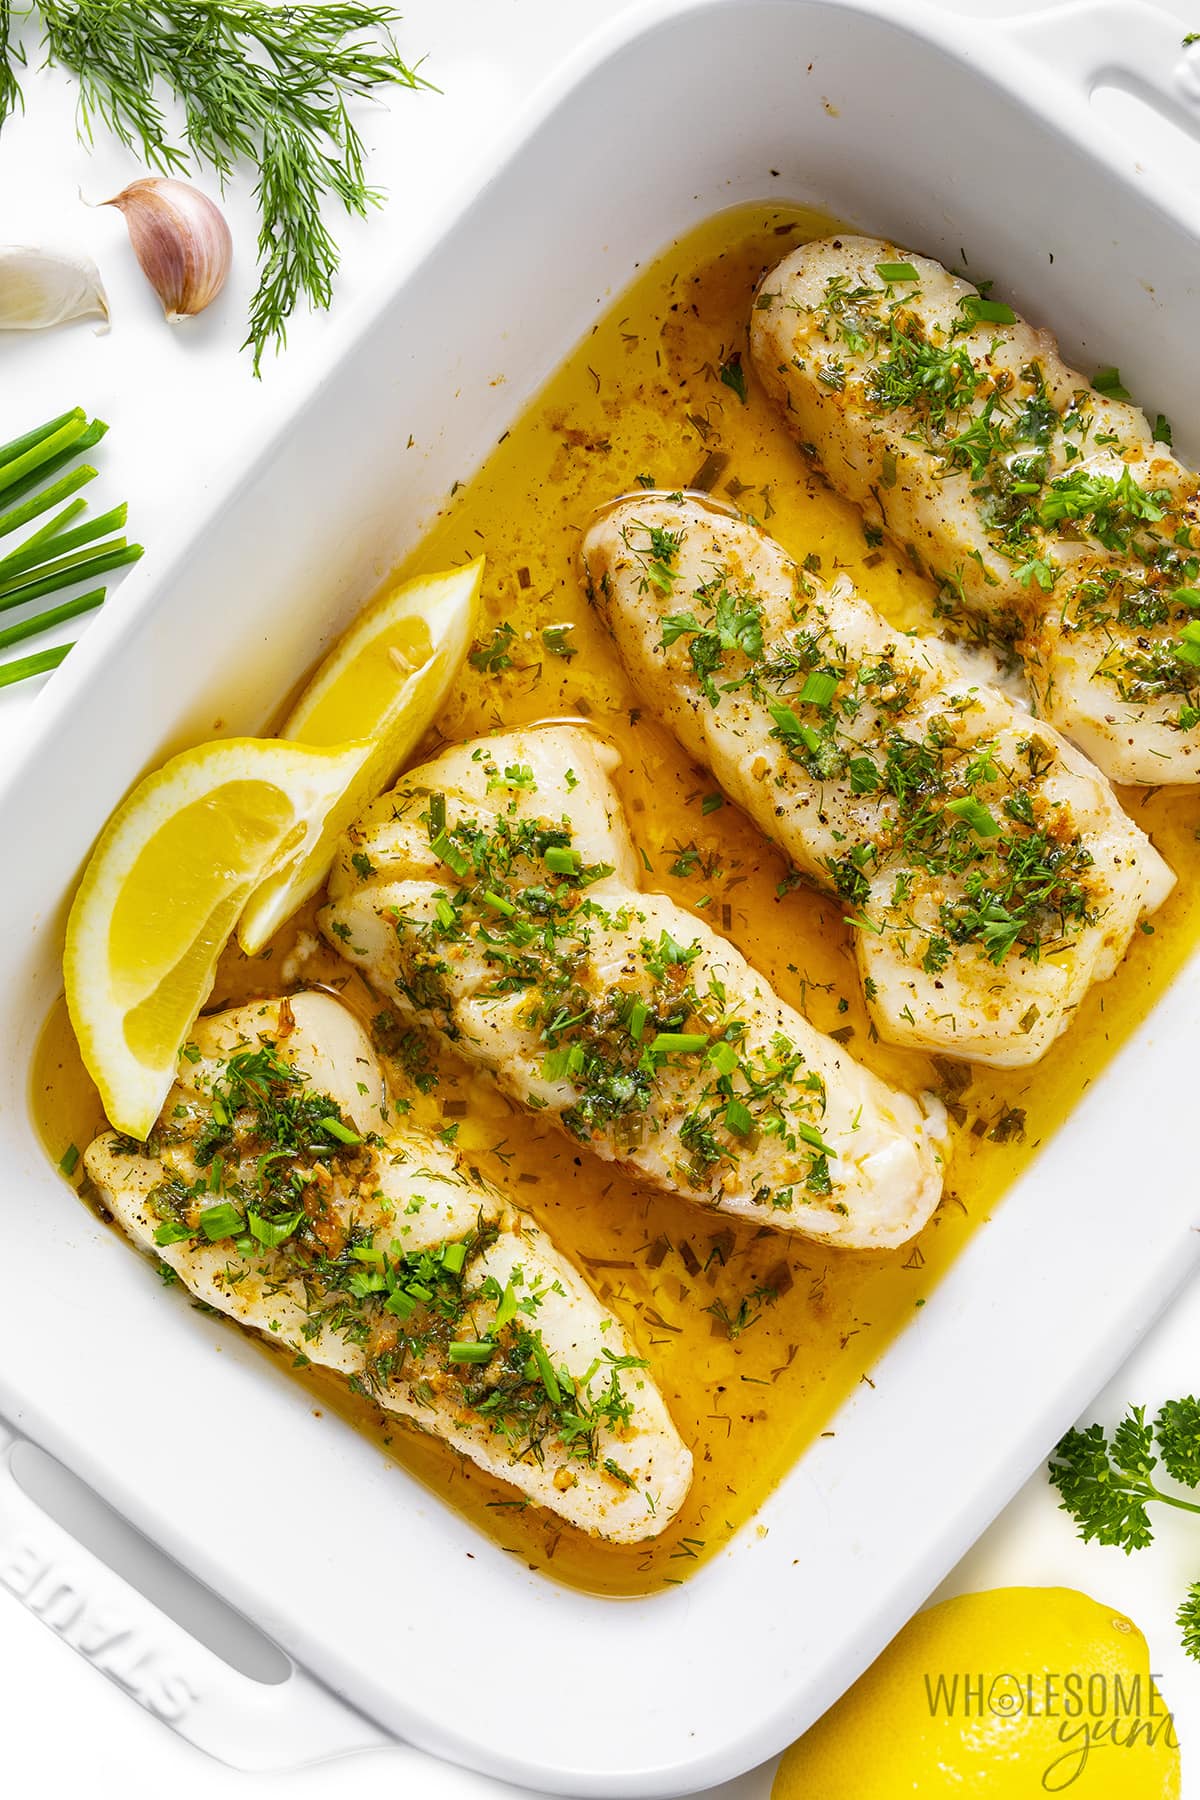 Baked halibut in a baking dish with lemon wedges and fresh herbs.